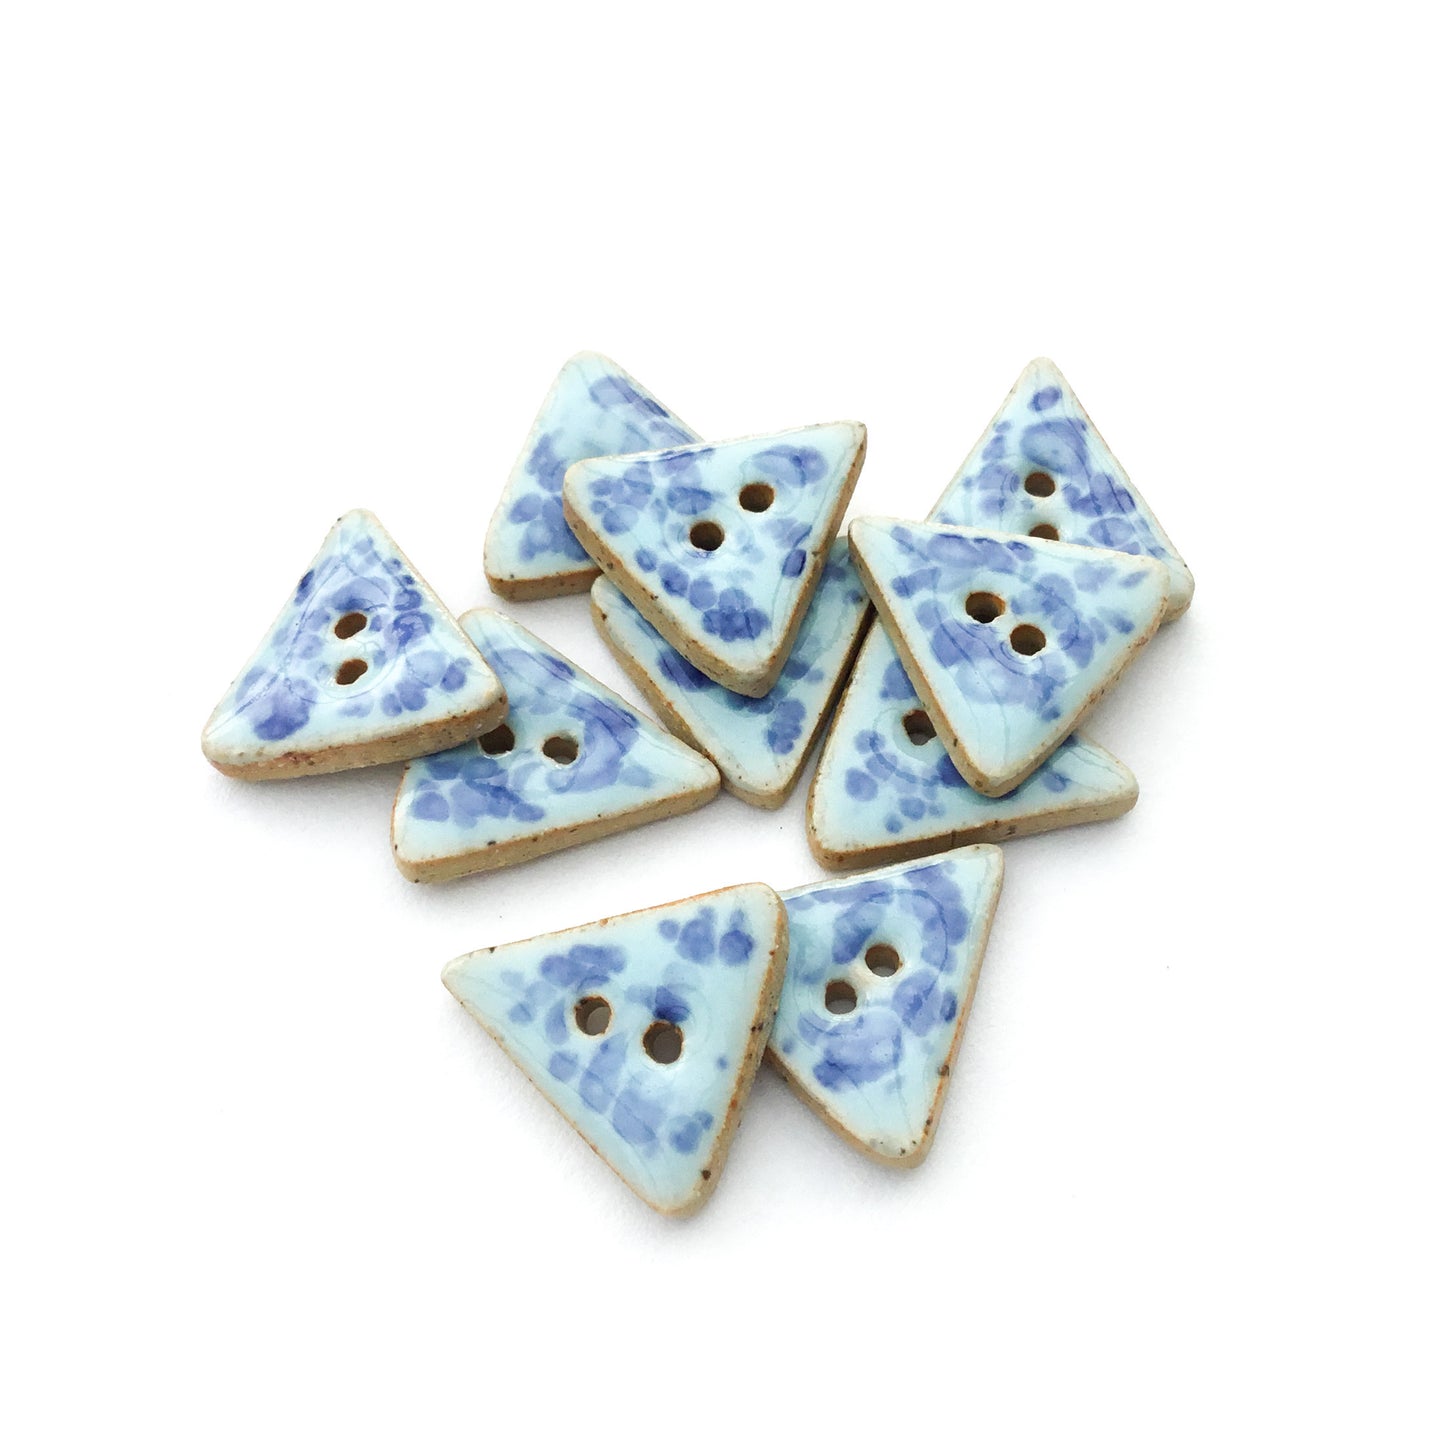 Speckled Blue Stoneware Buttons  5/8" - 10 Pack